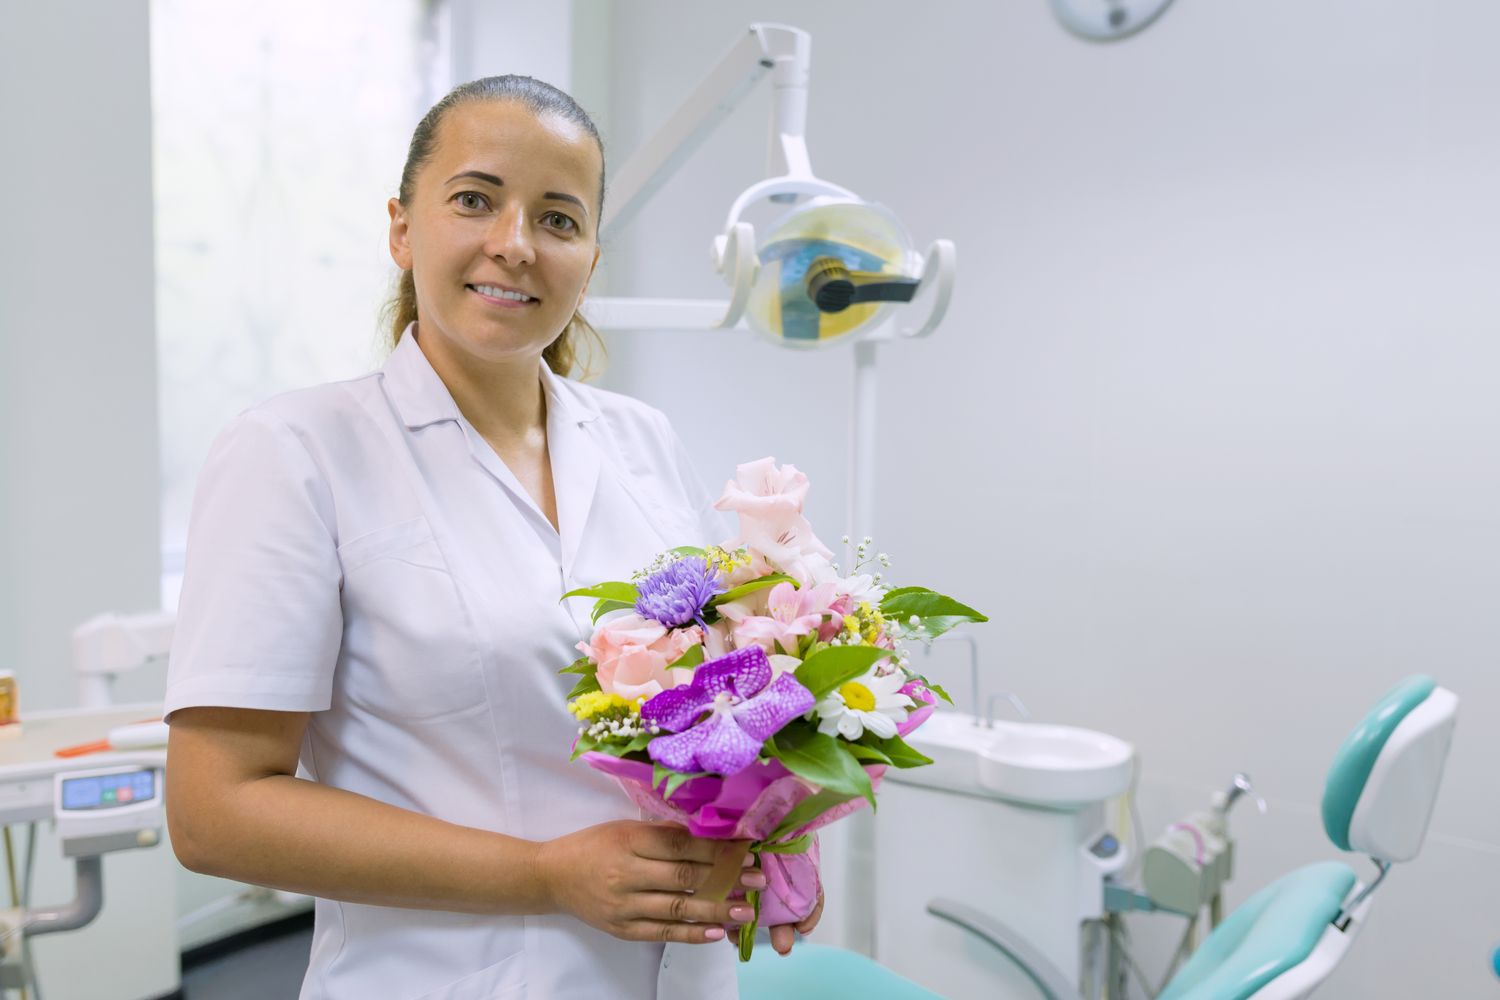 Female dentist smiling, with a bouquet of flowers, in dental office. National dentist's day